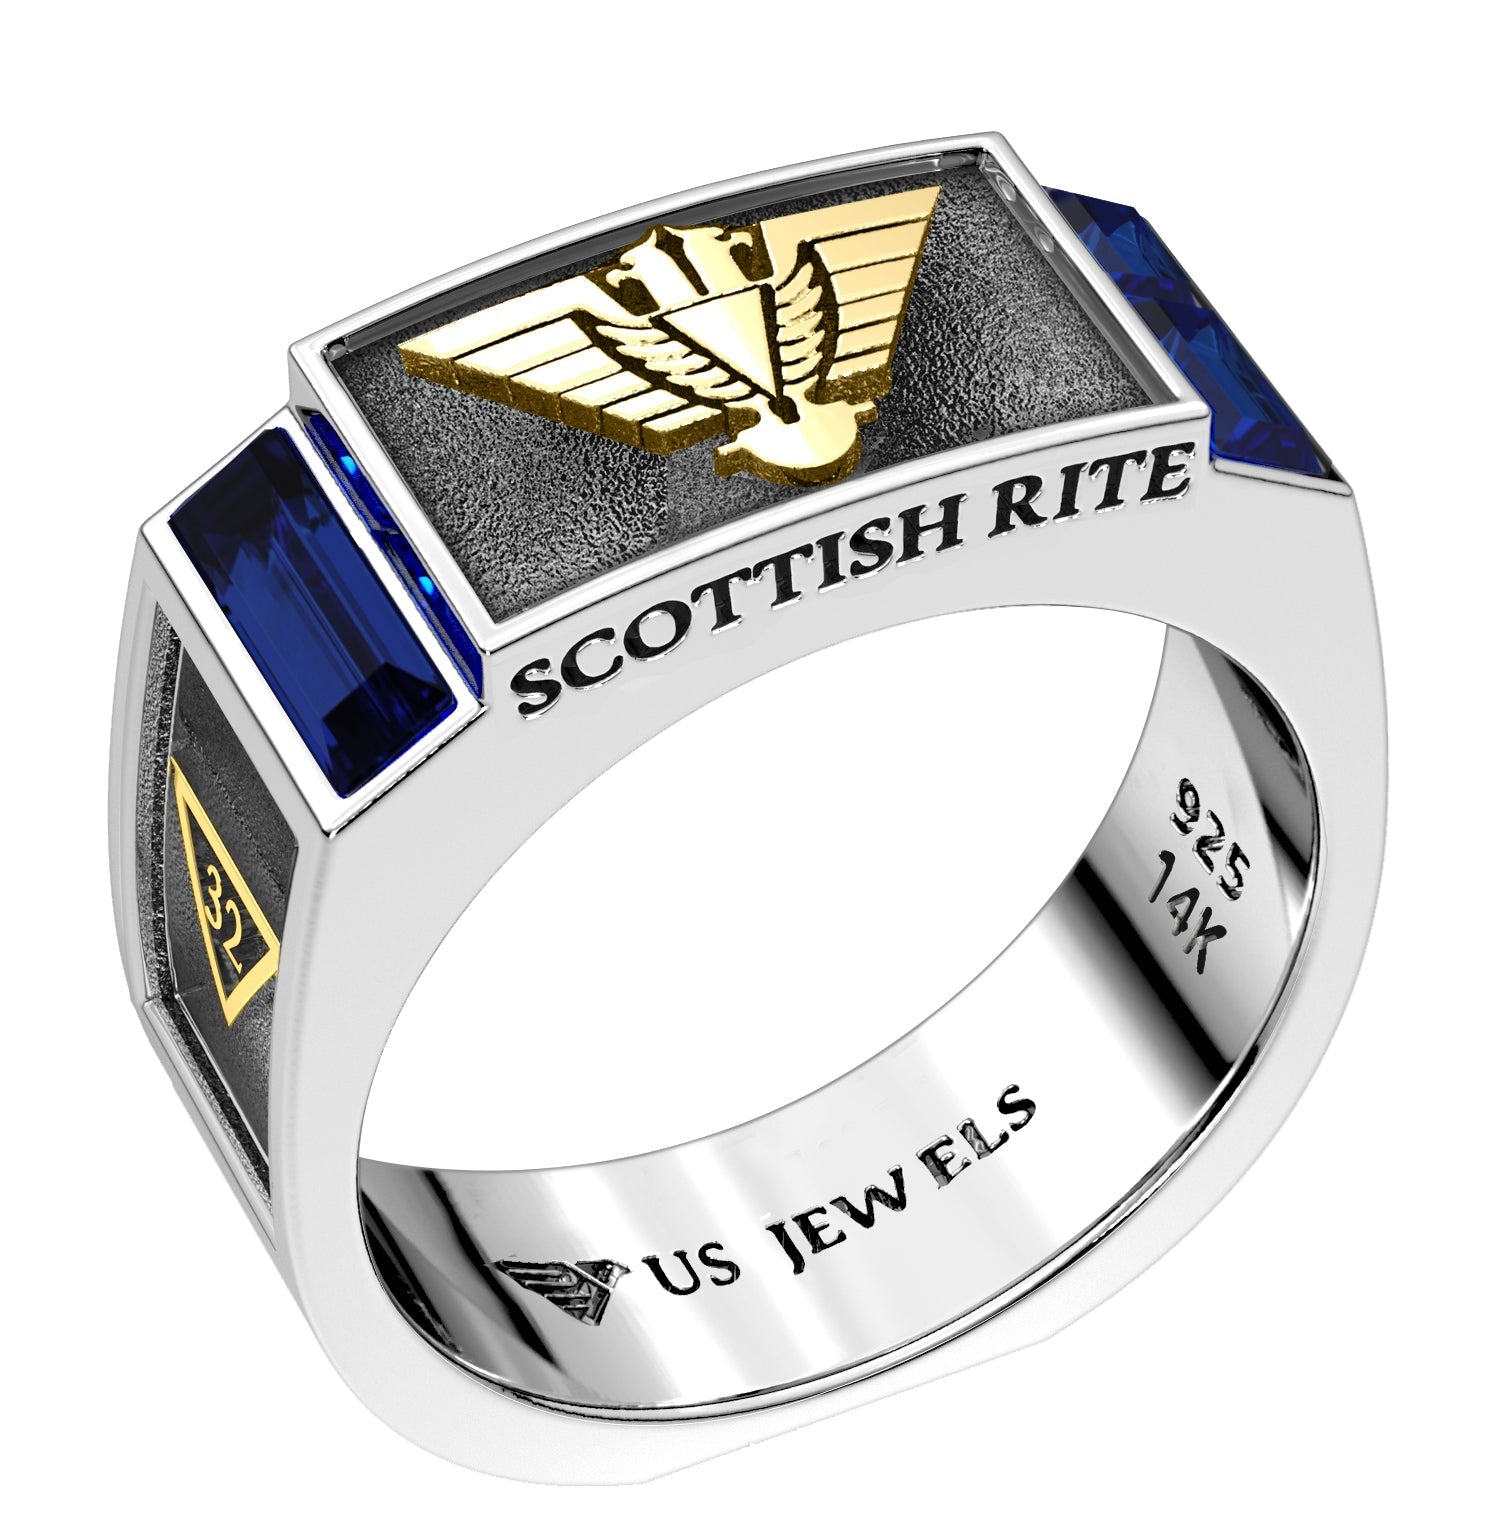 Men's 8mm Two Tone 925 Sterling Silver Scottish Rite Synthetic Sapphire Masonic Ring - US Jewels